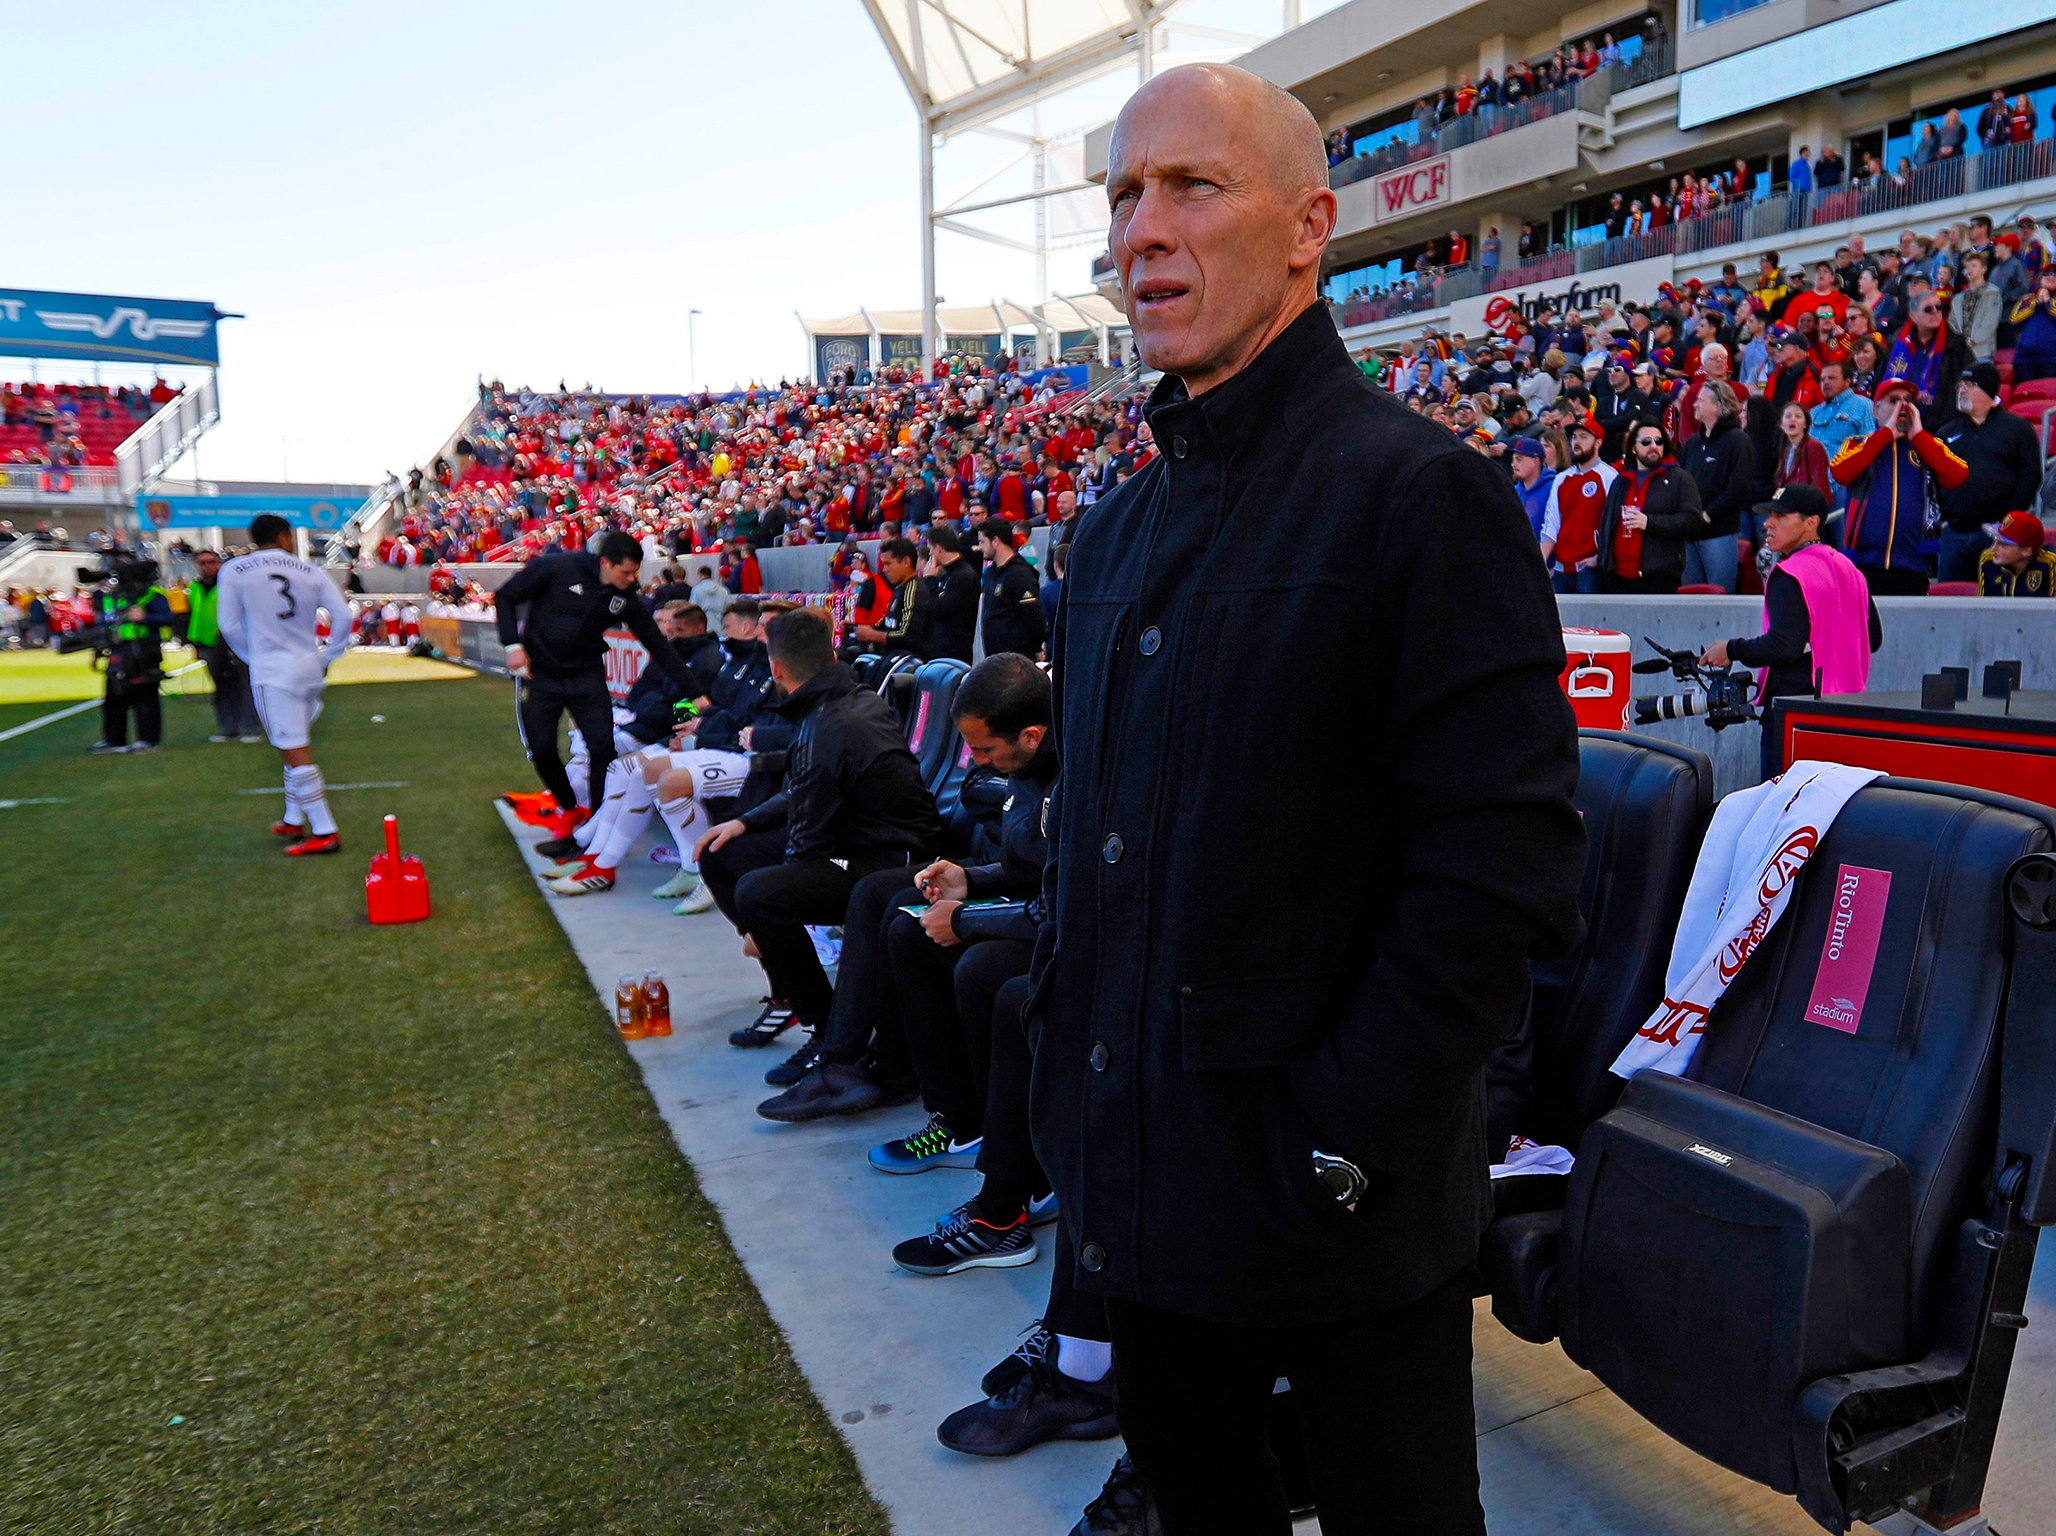 Bob Bradley is starting over in Los Angeles and is optimistic of what the future might bring